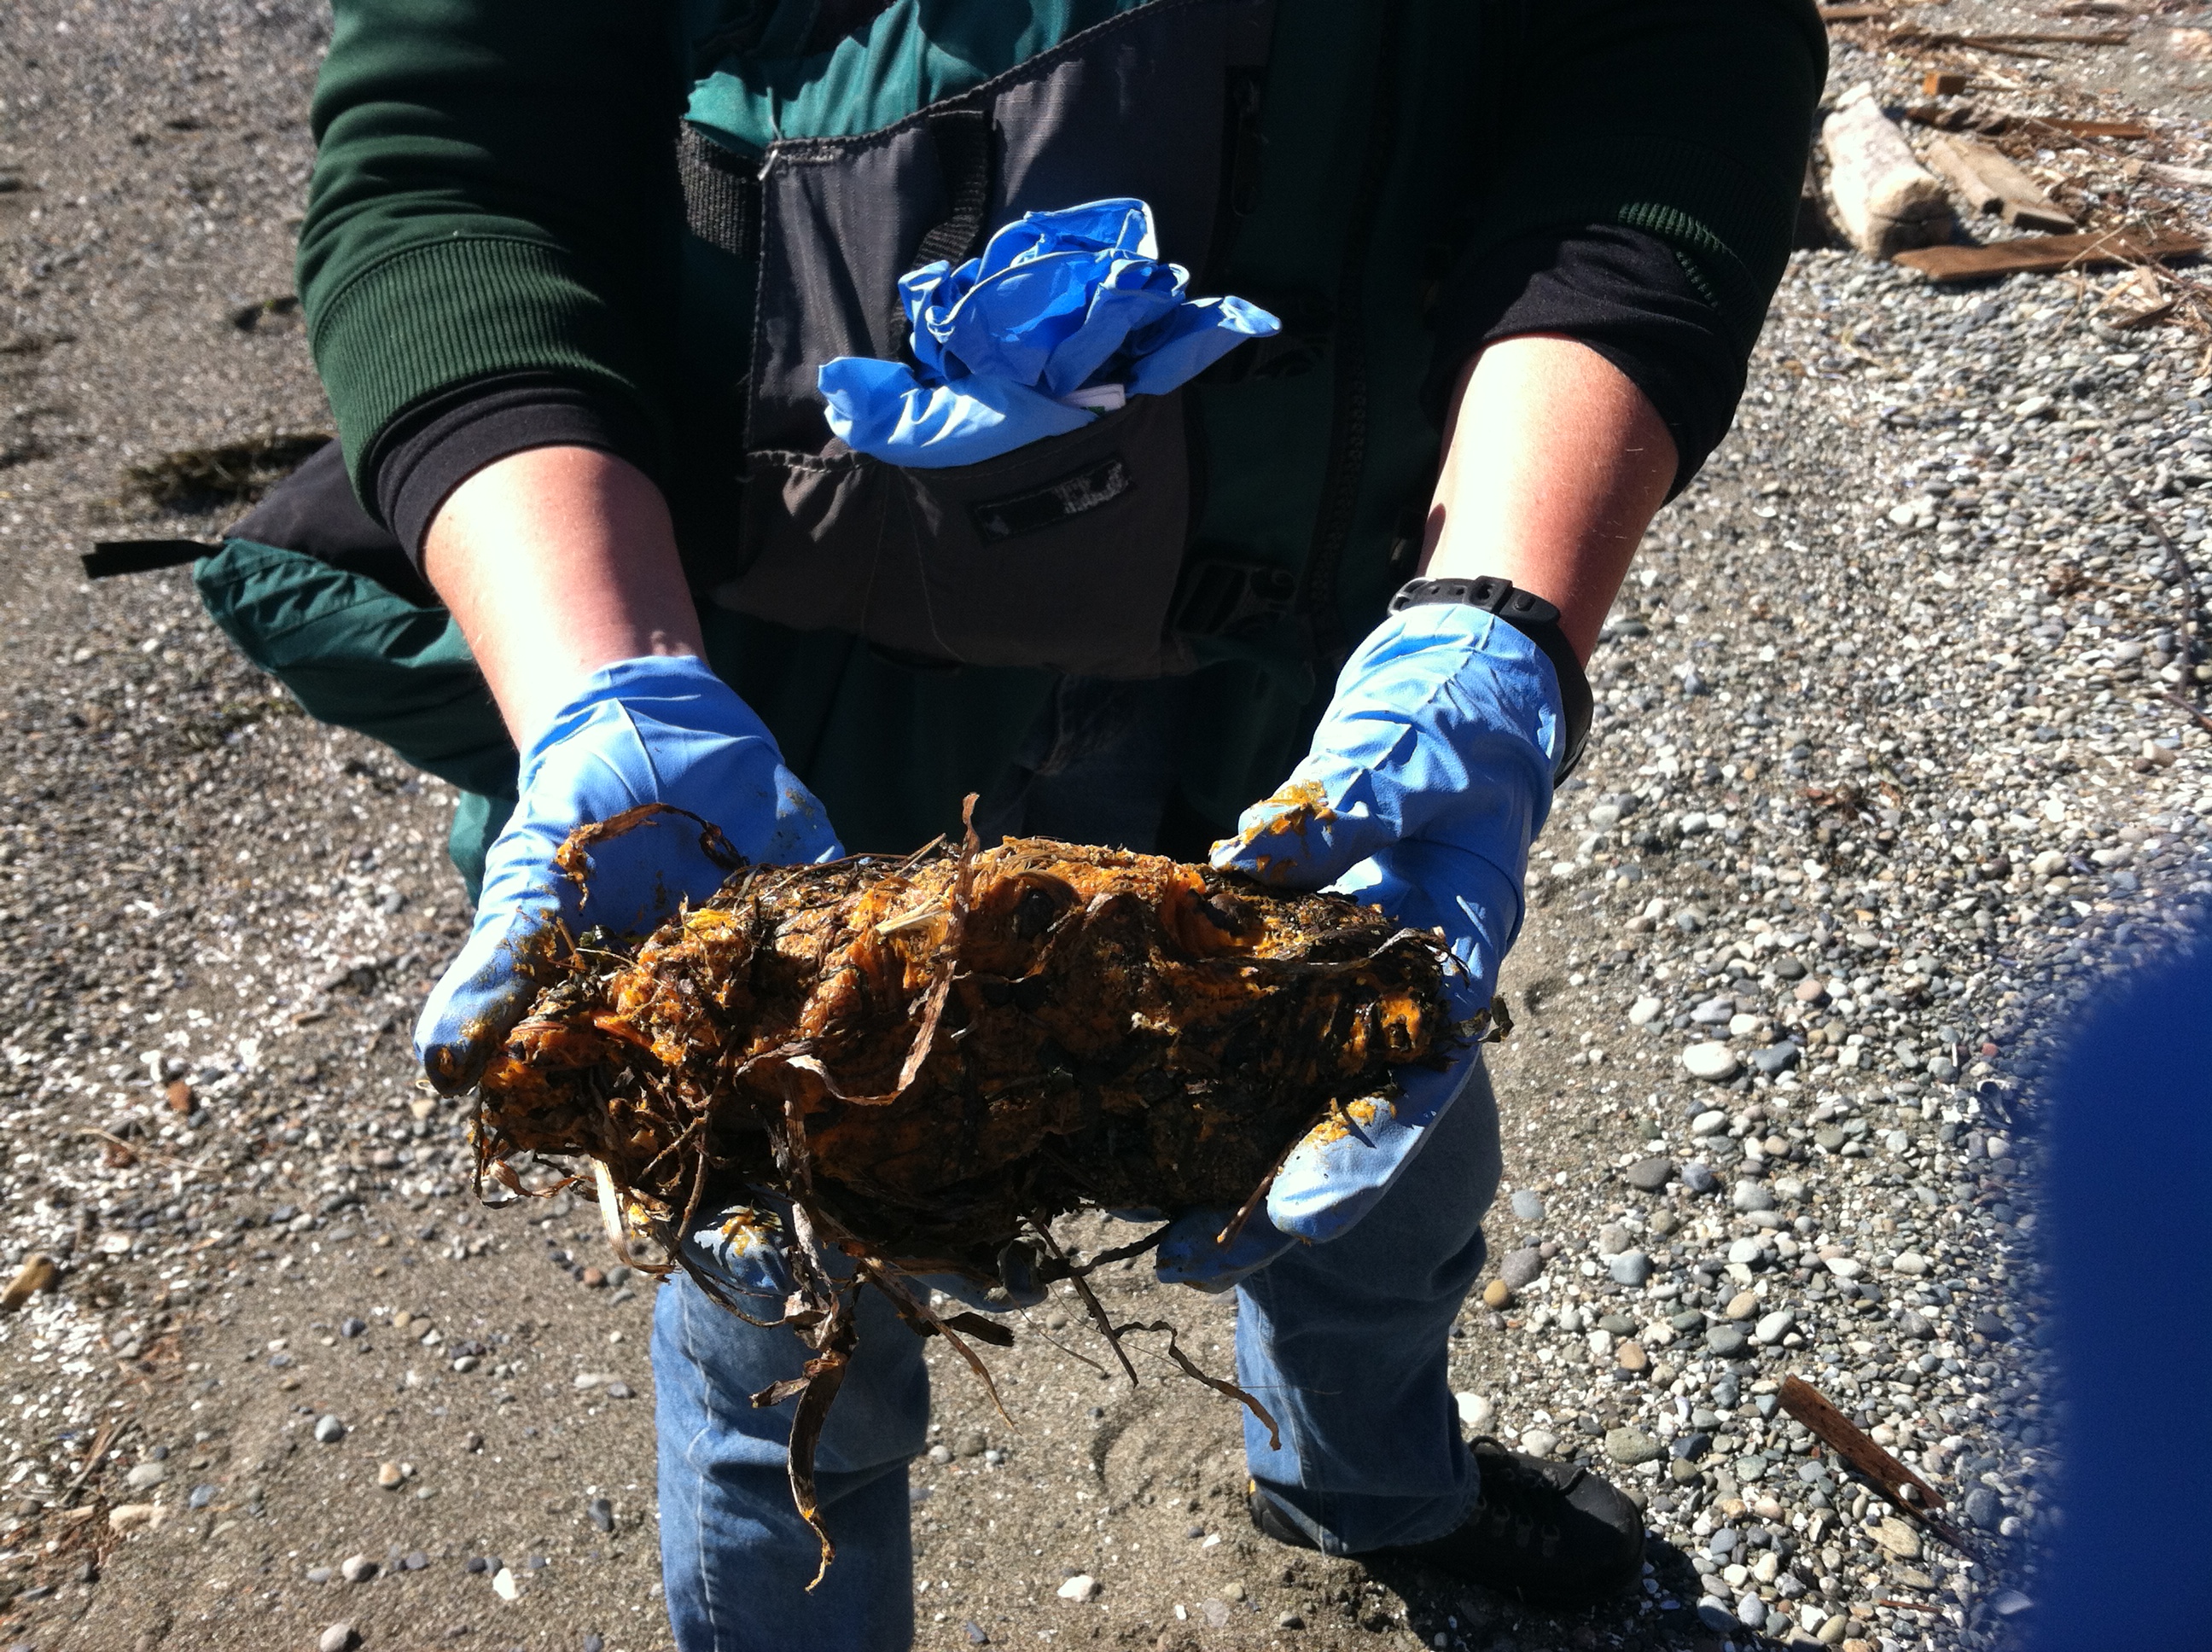 Example of a grease ball found on Vashon Island